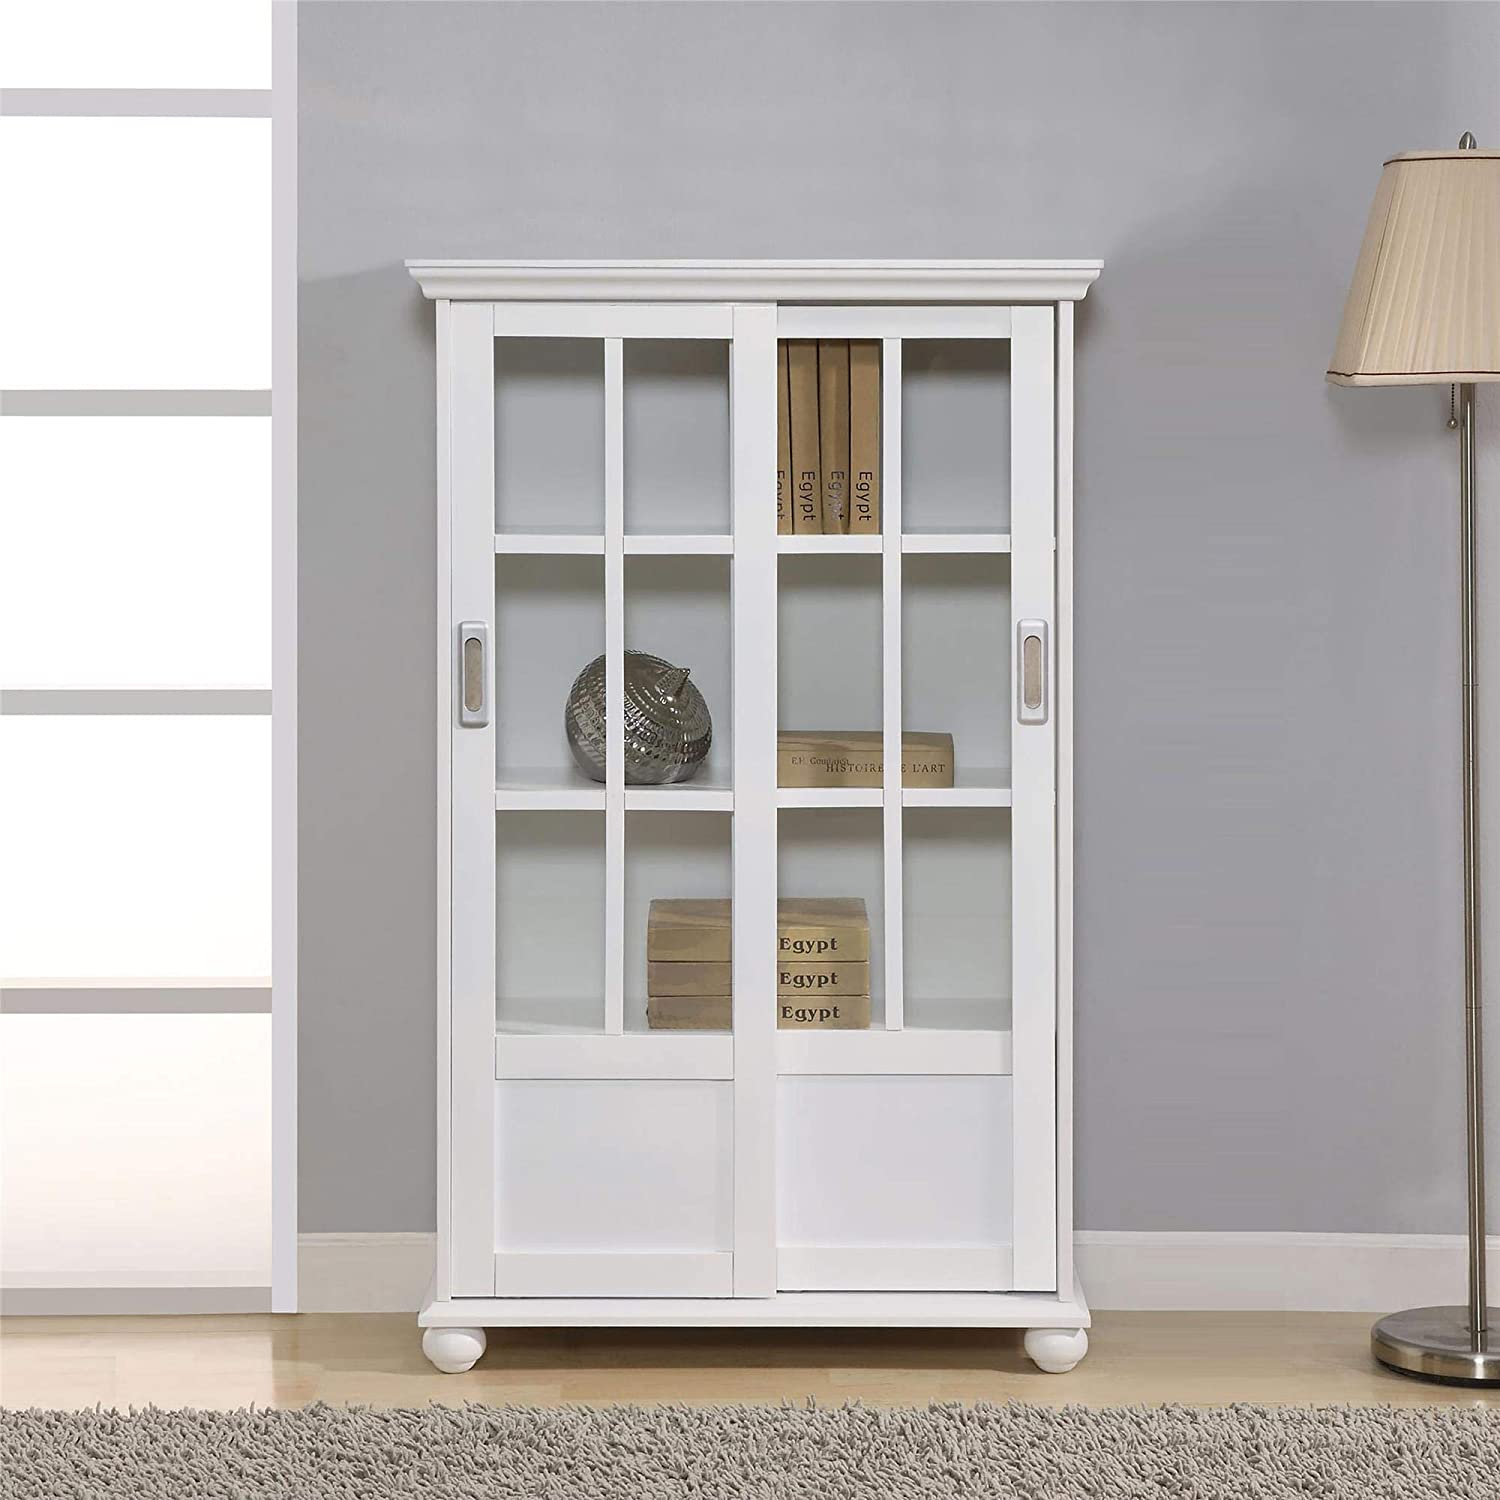 A bookcase with a glass door is among the best choices if you are proud of your personal library and want to showcase it like artworks. In nowadays’ market, Altra Aaron Lane Bookcase with Sliding Glass Doors is the best of its kind.
